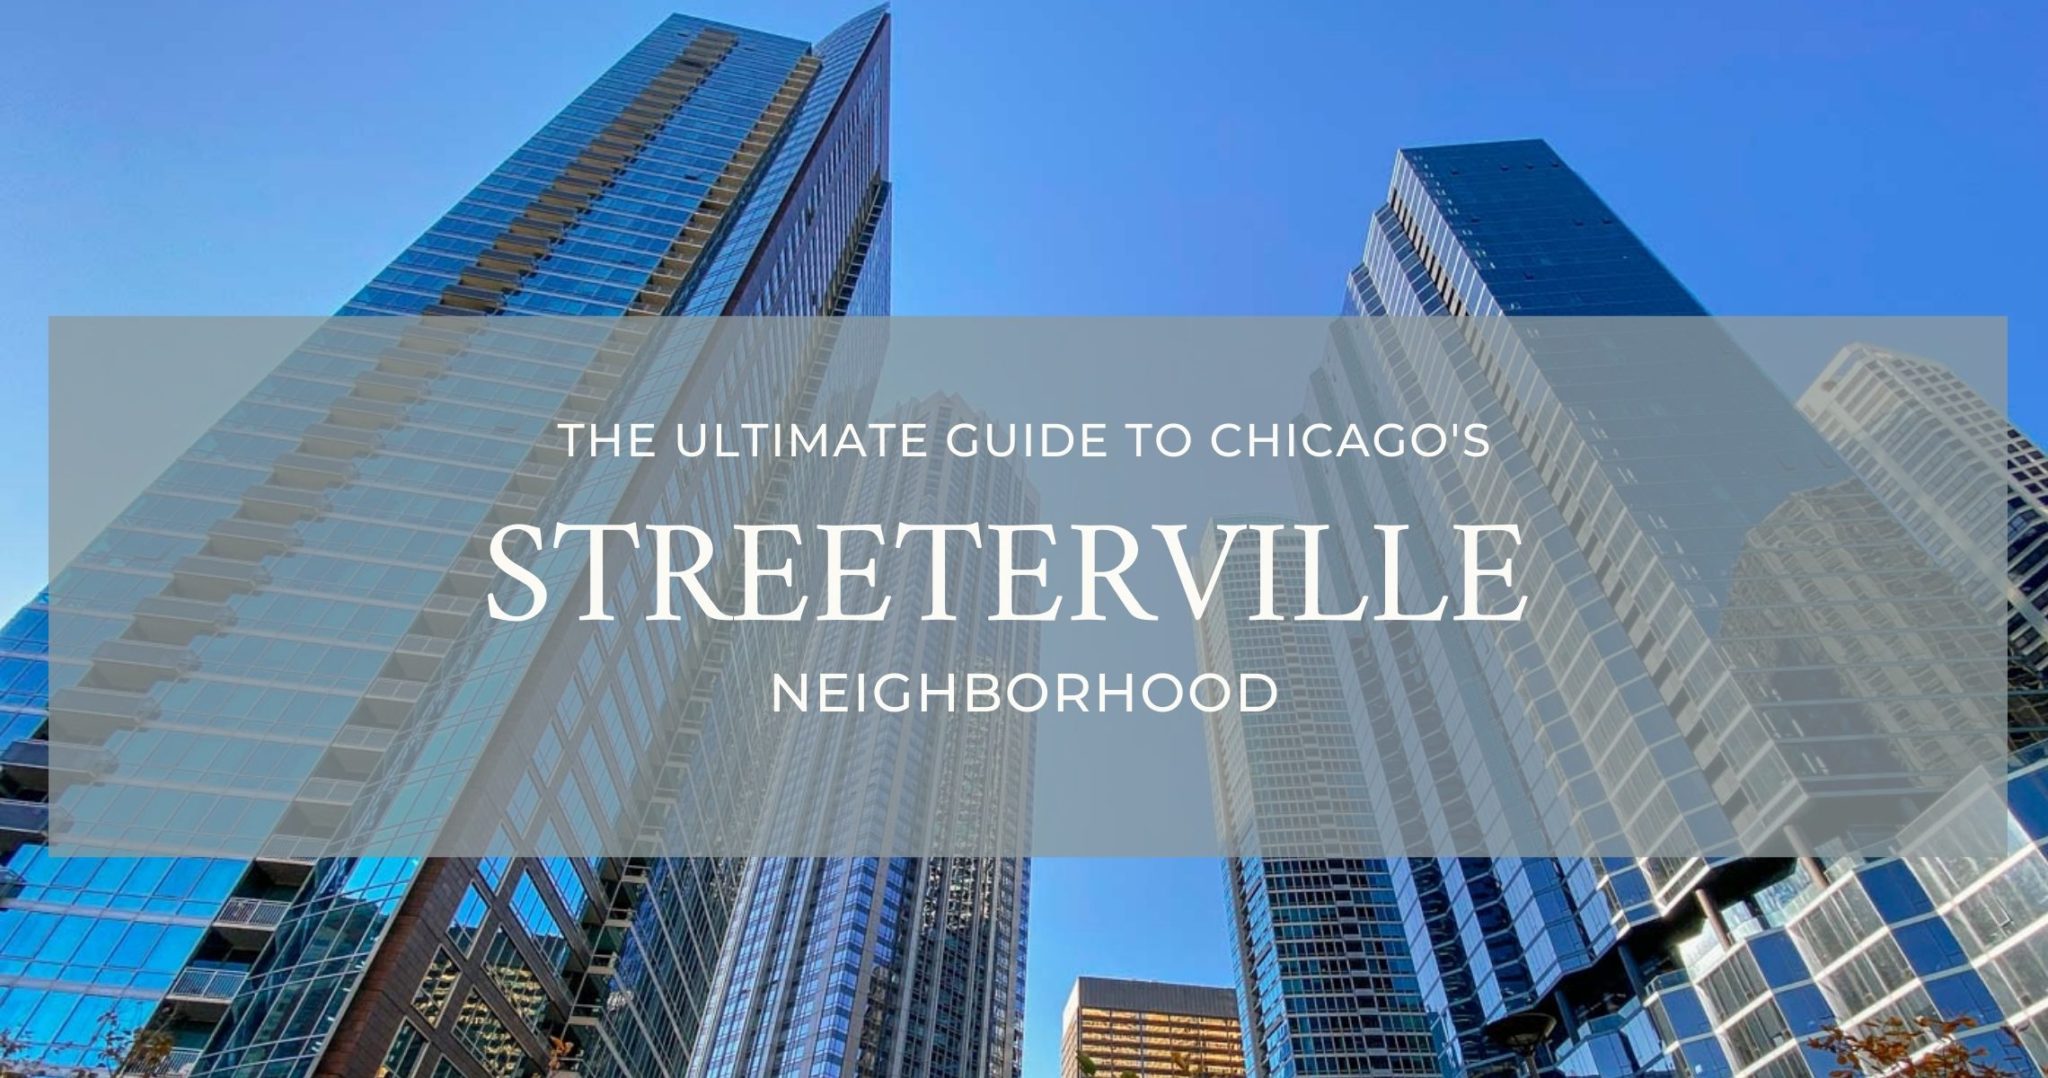 The Ultimate Guide to Chicago's Streeterville neighborhood